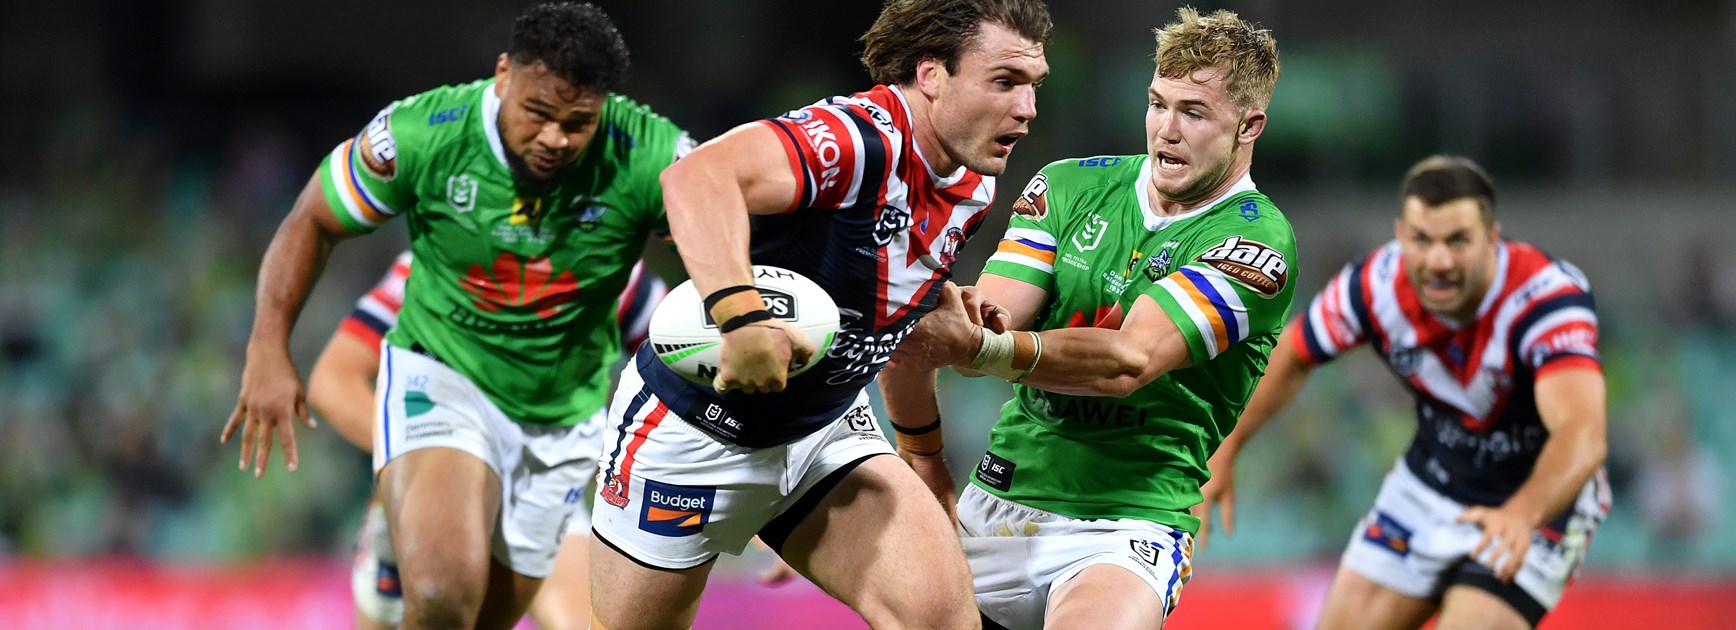 All You Need To Know: Trial vs Canberra Raiders